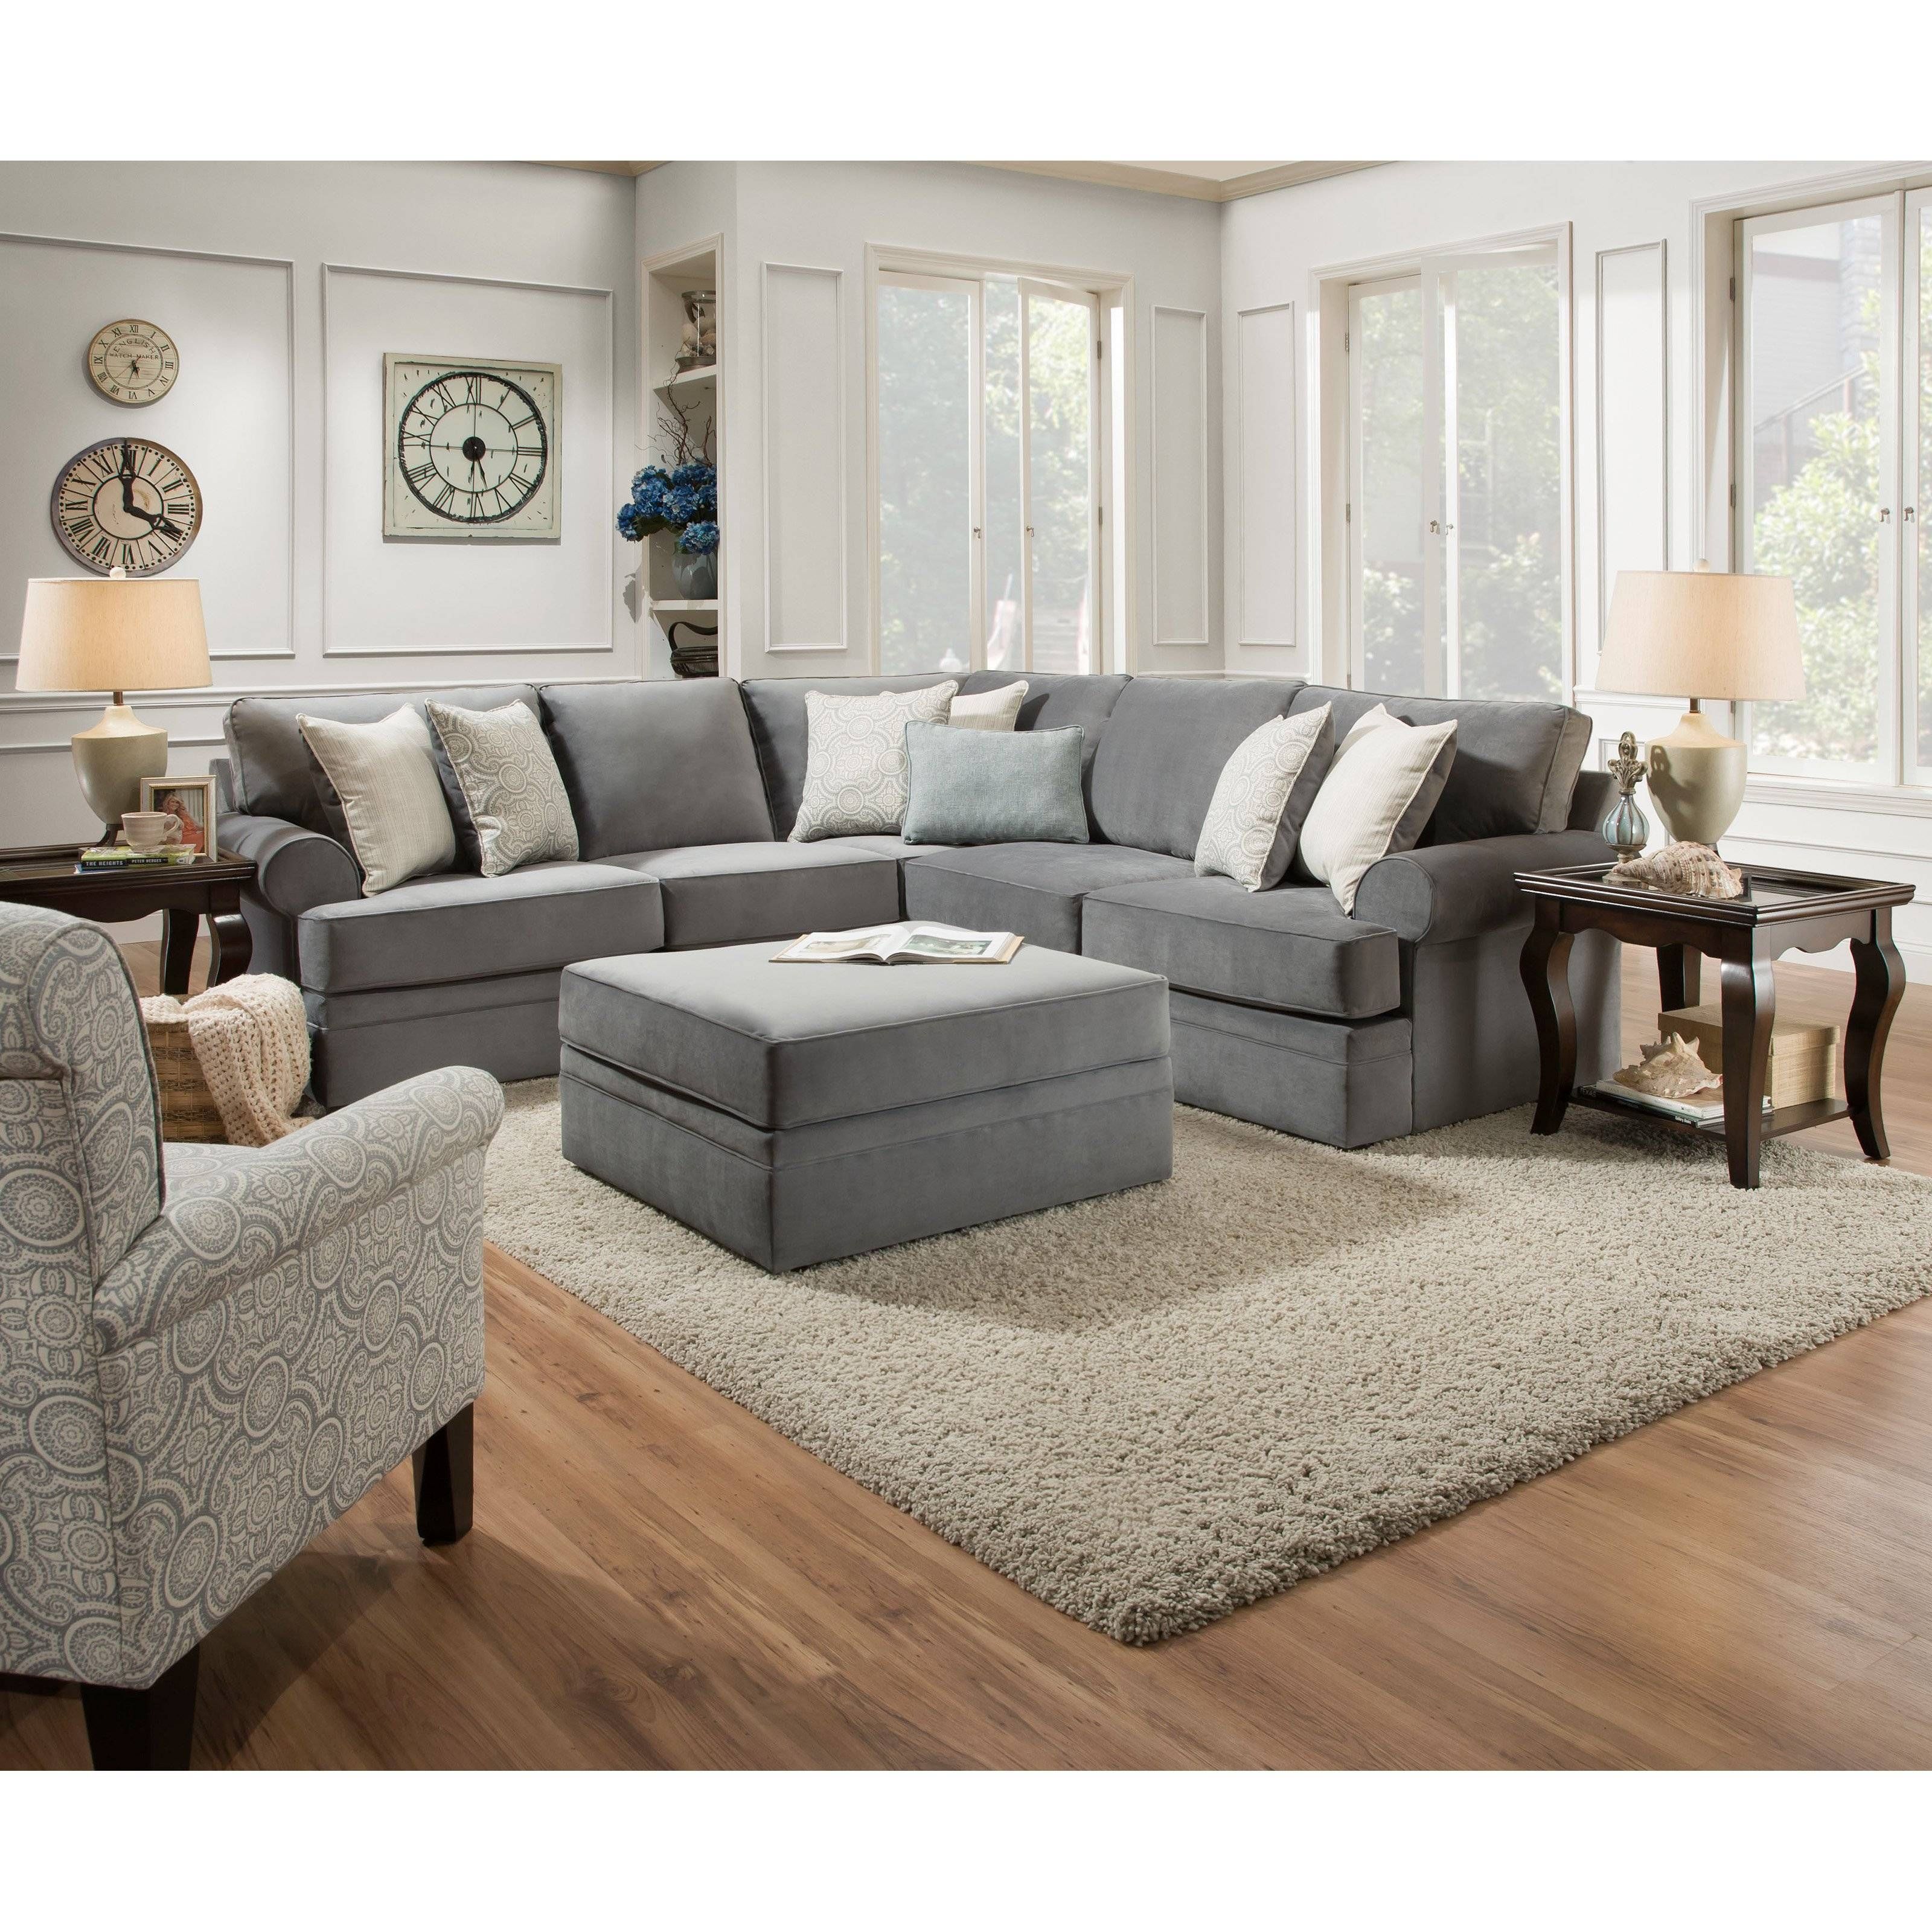 Simmons Upholstery Dublin Briar Sectional Sofa | Hayneedle Intended For Simmons Sectional Sofas (View 30 of 30)